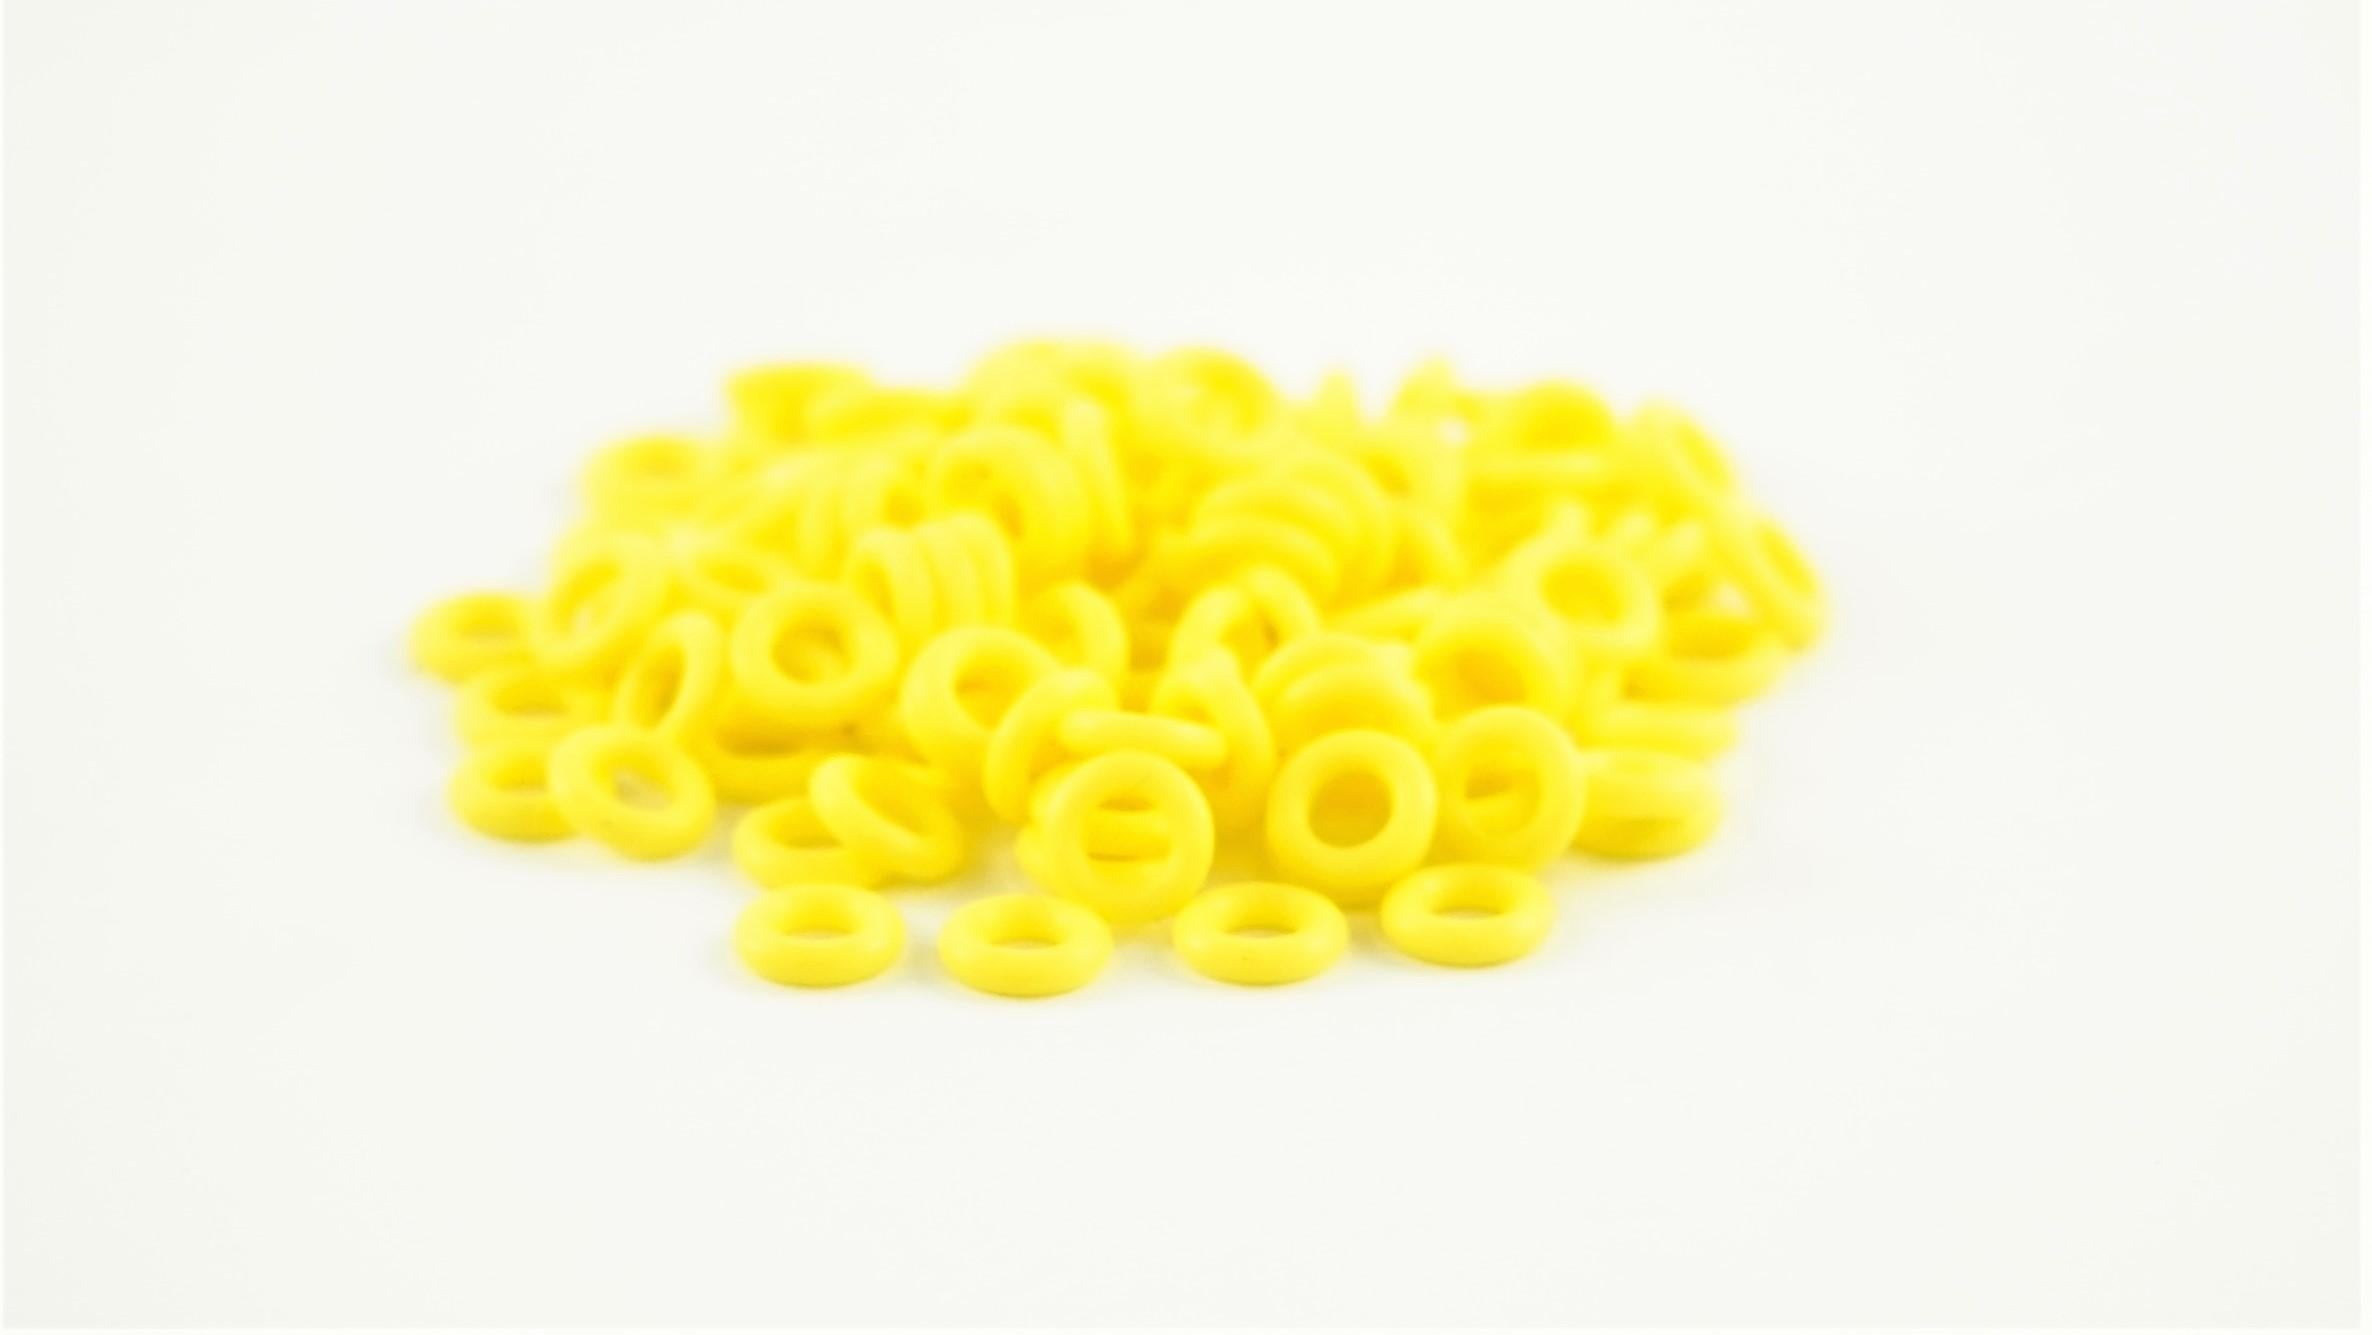 MK Pro Rings Silicone Switch Dampening O-rings 30A 2.5mm (120 Pack) MKMWKWLDOO |0|